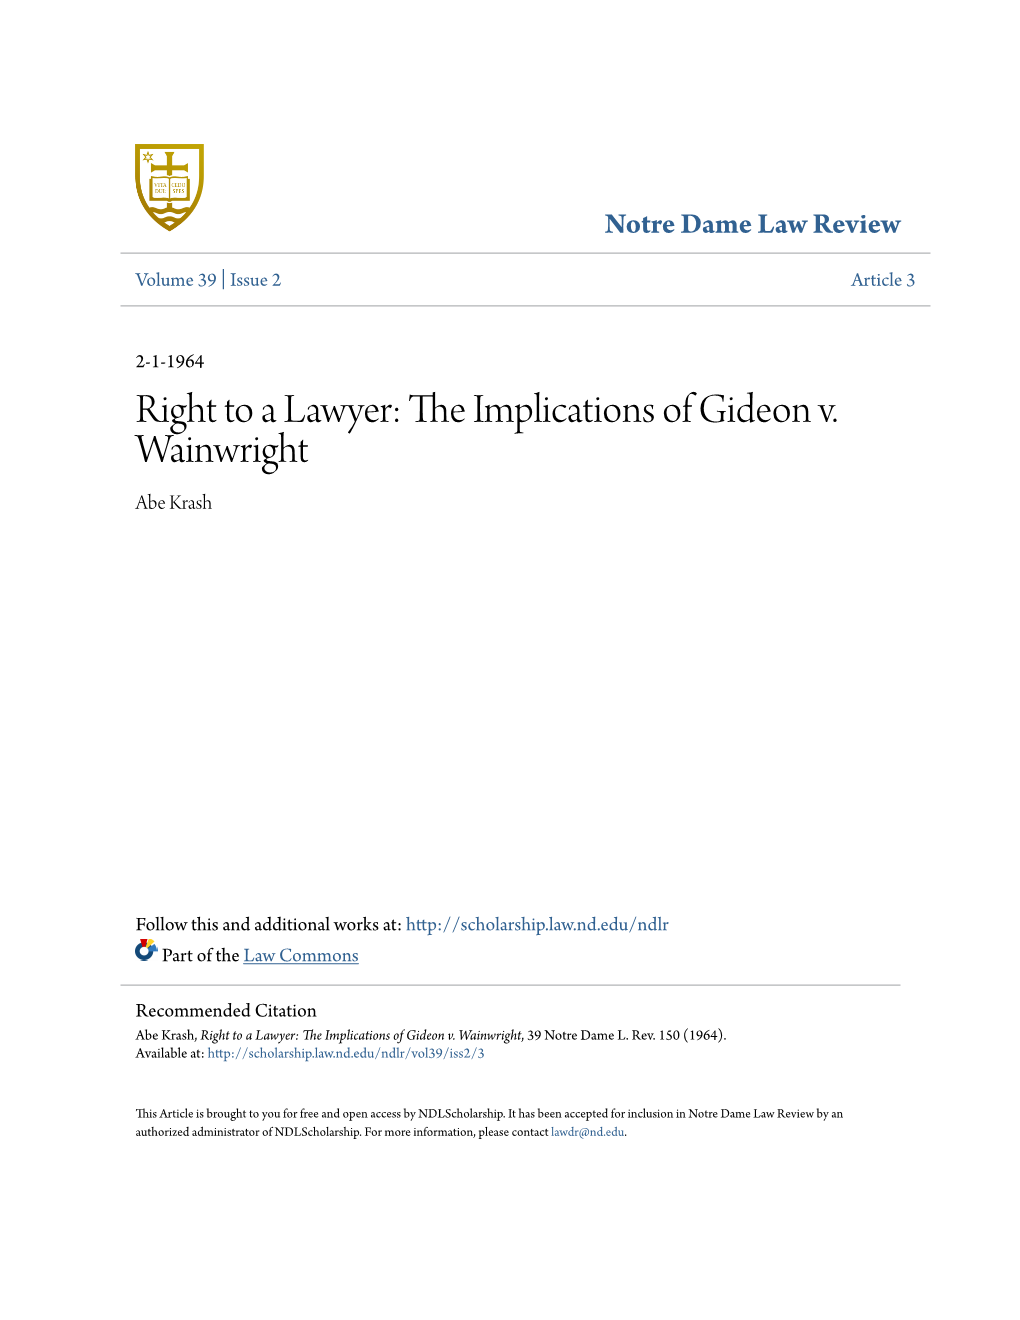 The Implications of Gideon V. Wainwright, 39 Notre Dame L